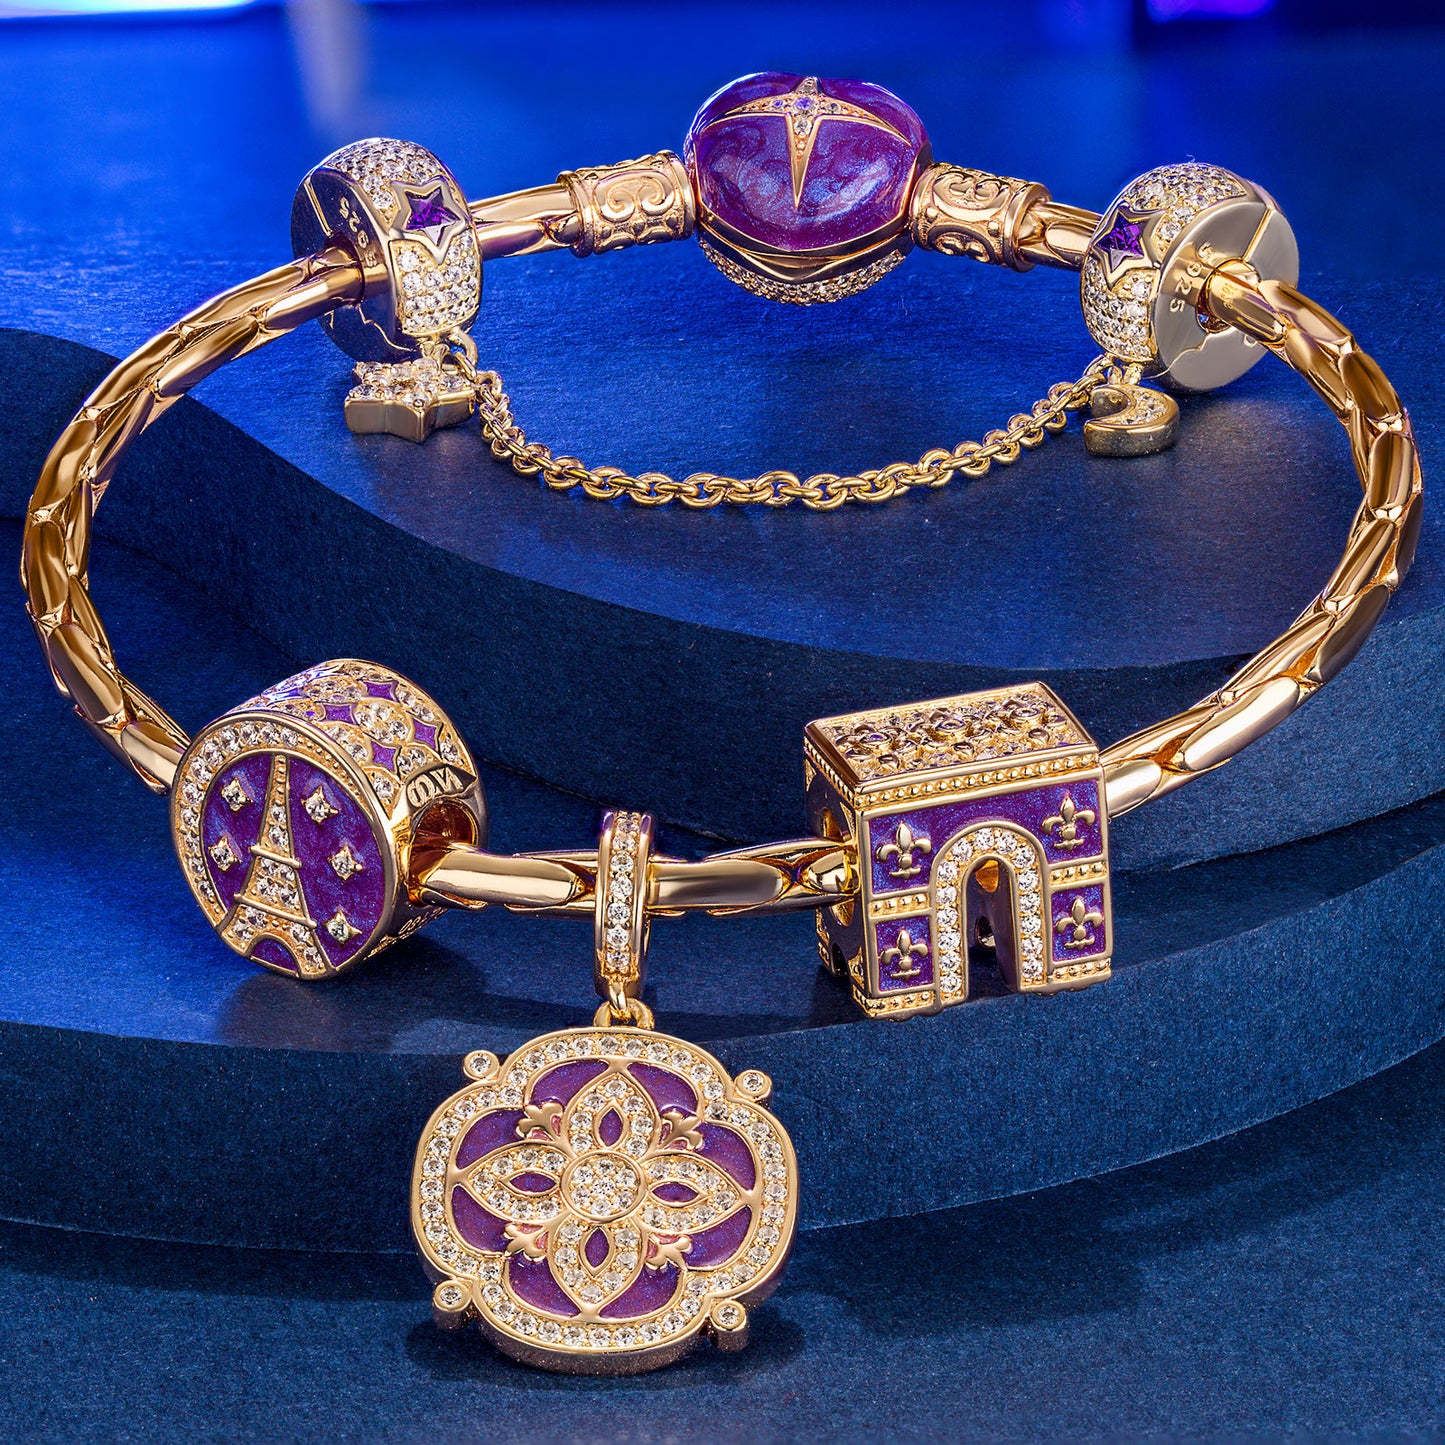 Sterling Silver Majestic Triumphal Arch Charms Bracelet Set With Enamel In 14K Gold Plated